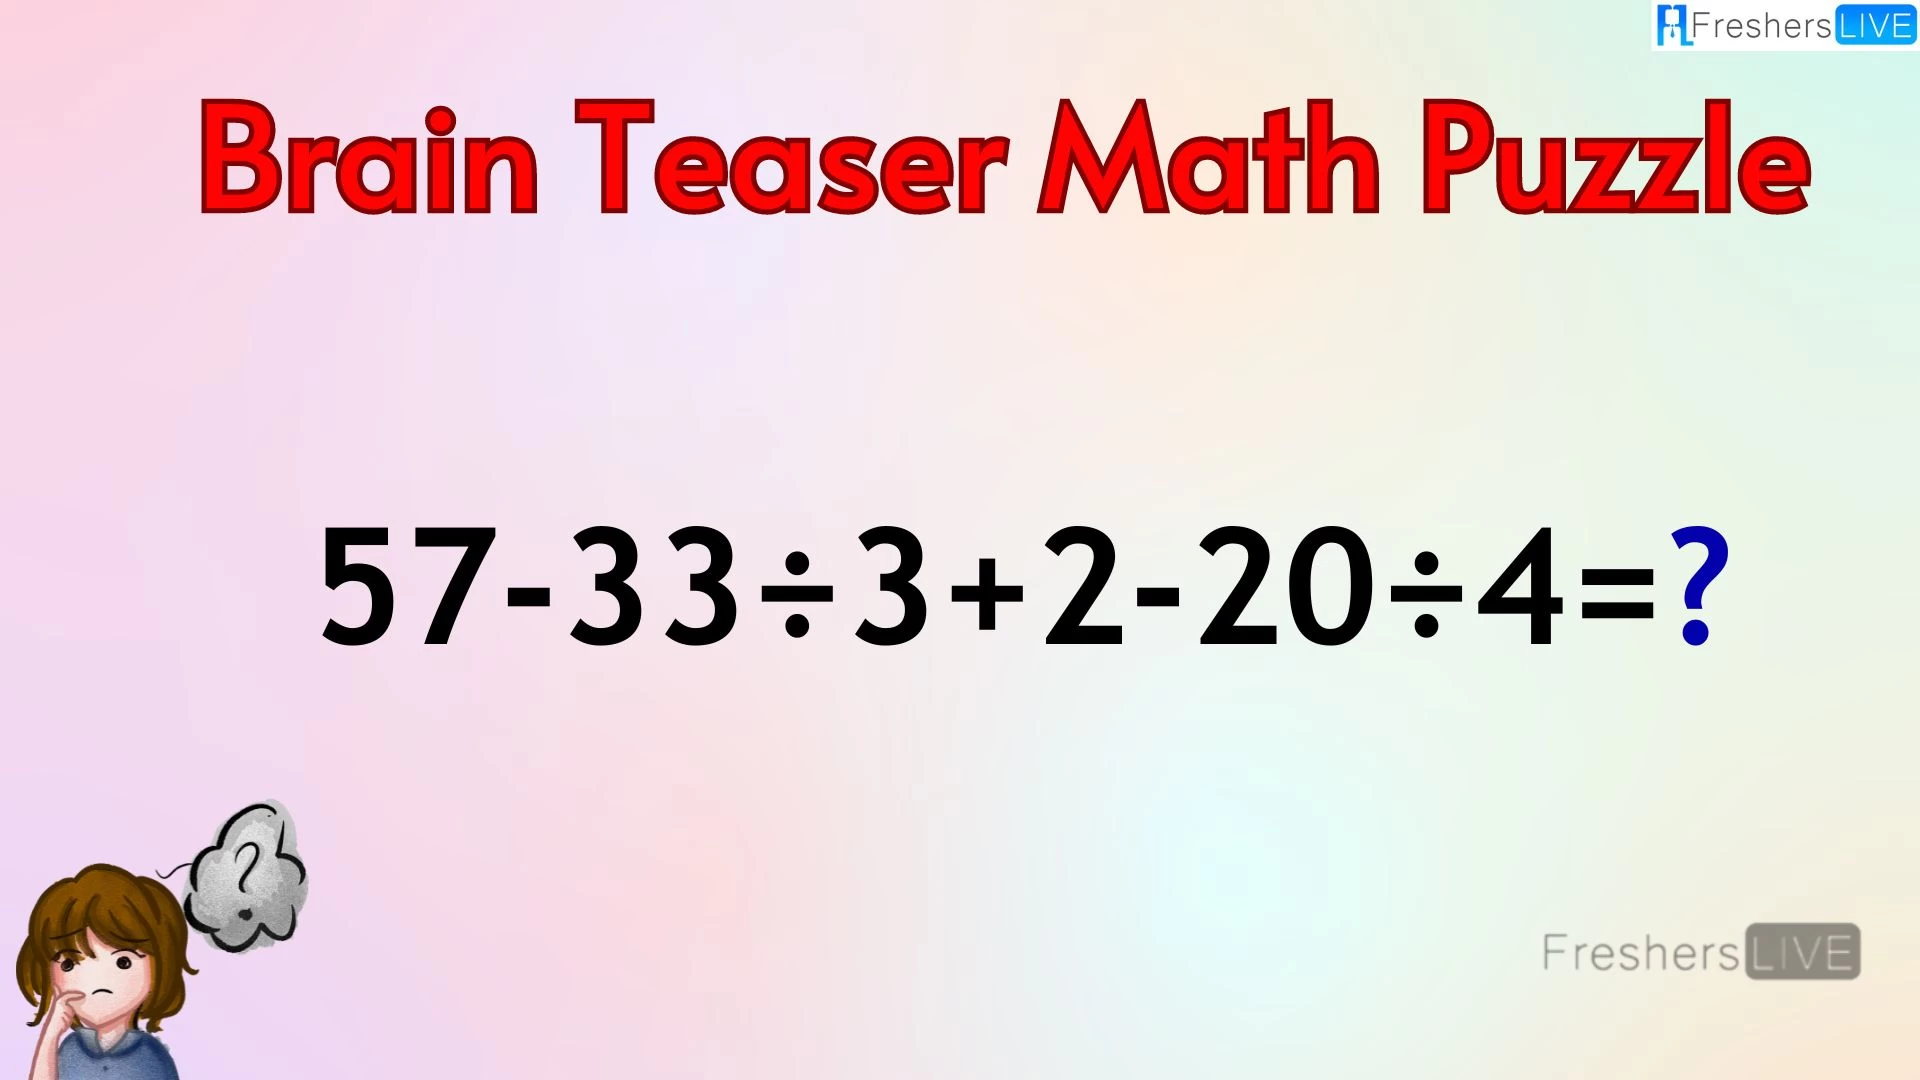 Can You Solve This Math Puzzle? Equate 57-33÷3+2-20÷4=?